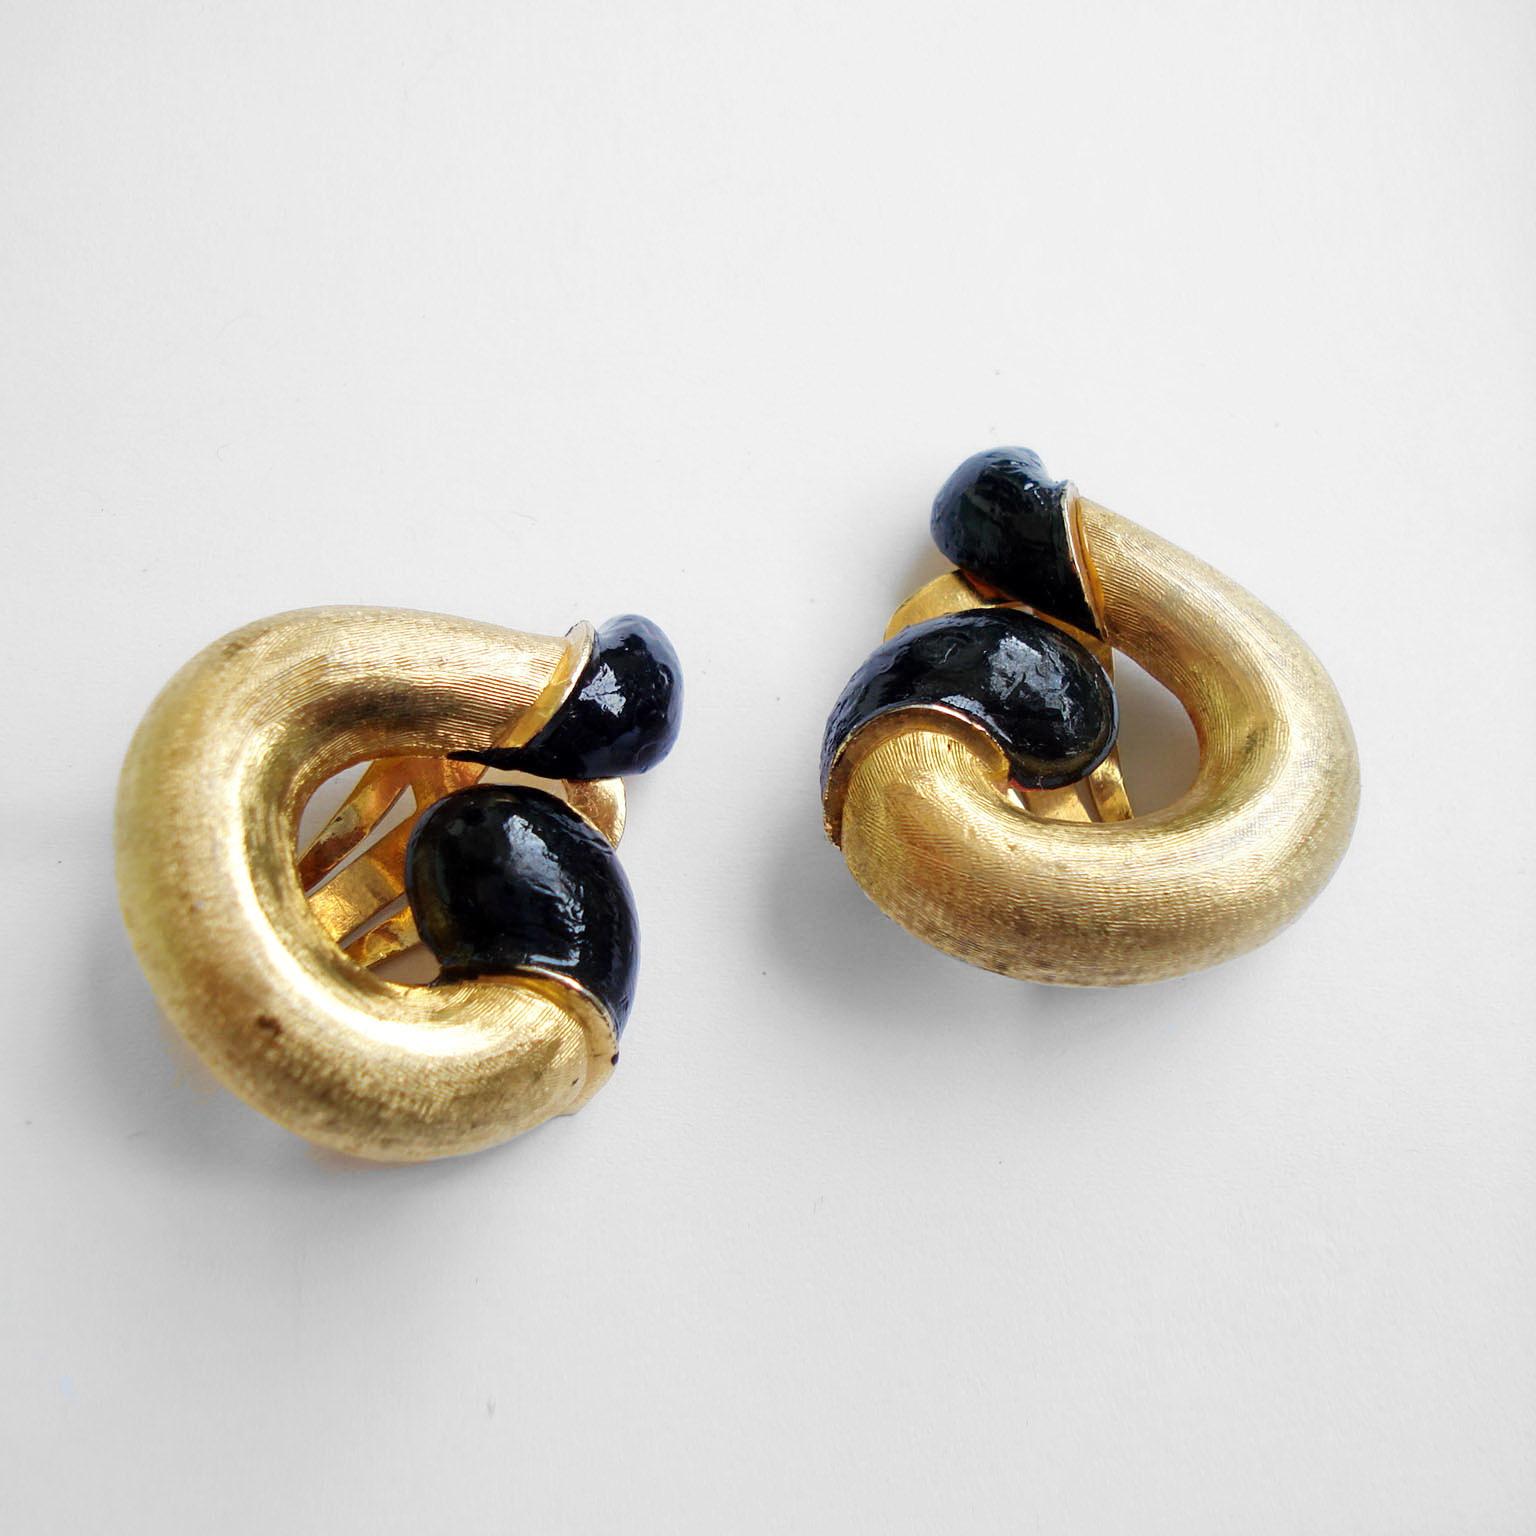 Beautiful vintage Pierre Cardin clip on earrings, shaped as a stylized logo with black enameled highlights to the end. 

Condition: Very good preowned condition.
Creator: Pierre Cardin
Materials and Techniques: jewelry alloy, gilt and